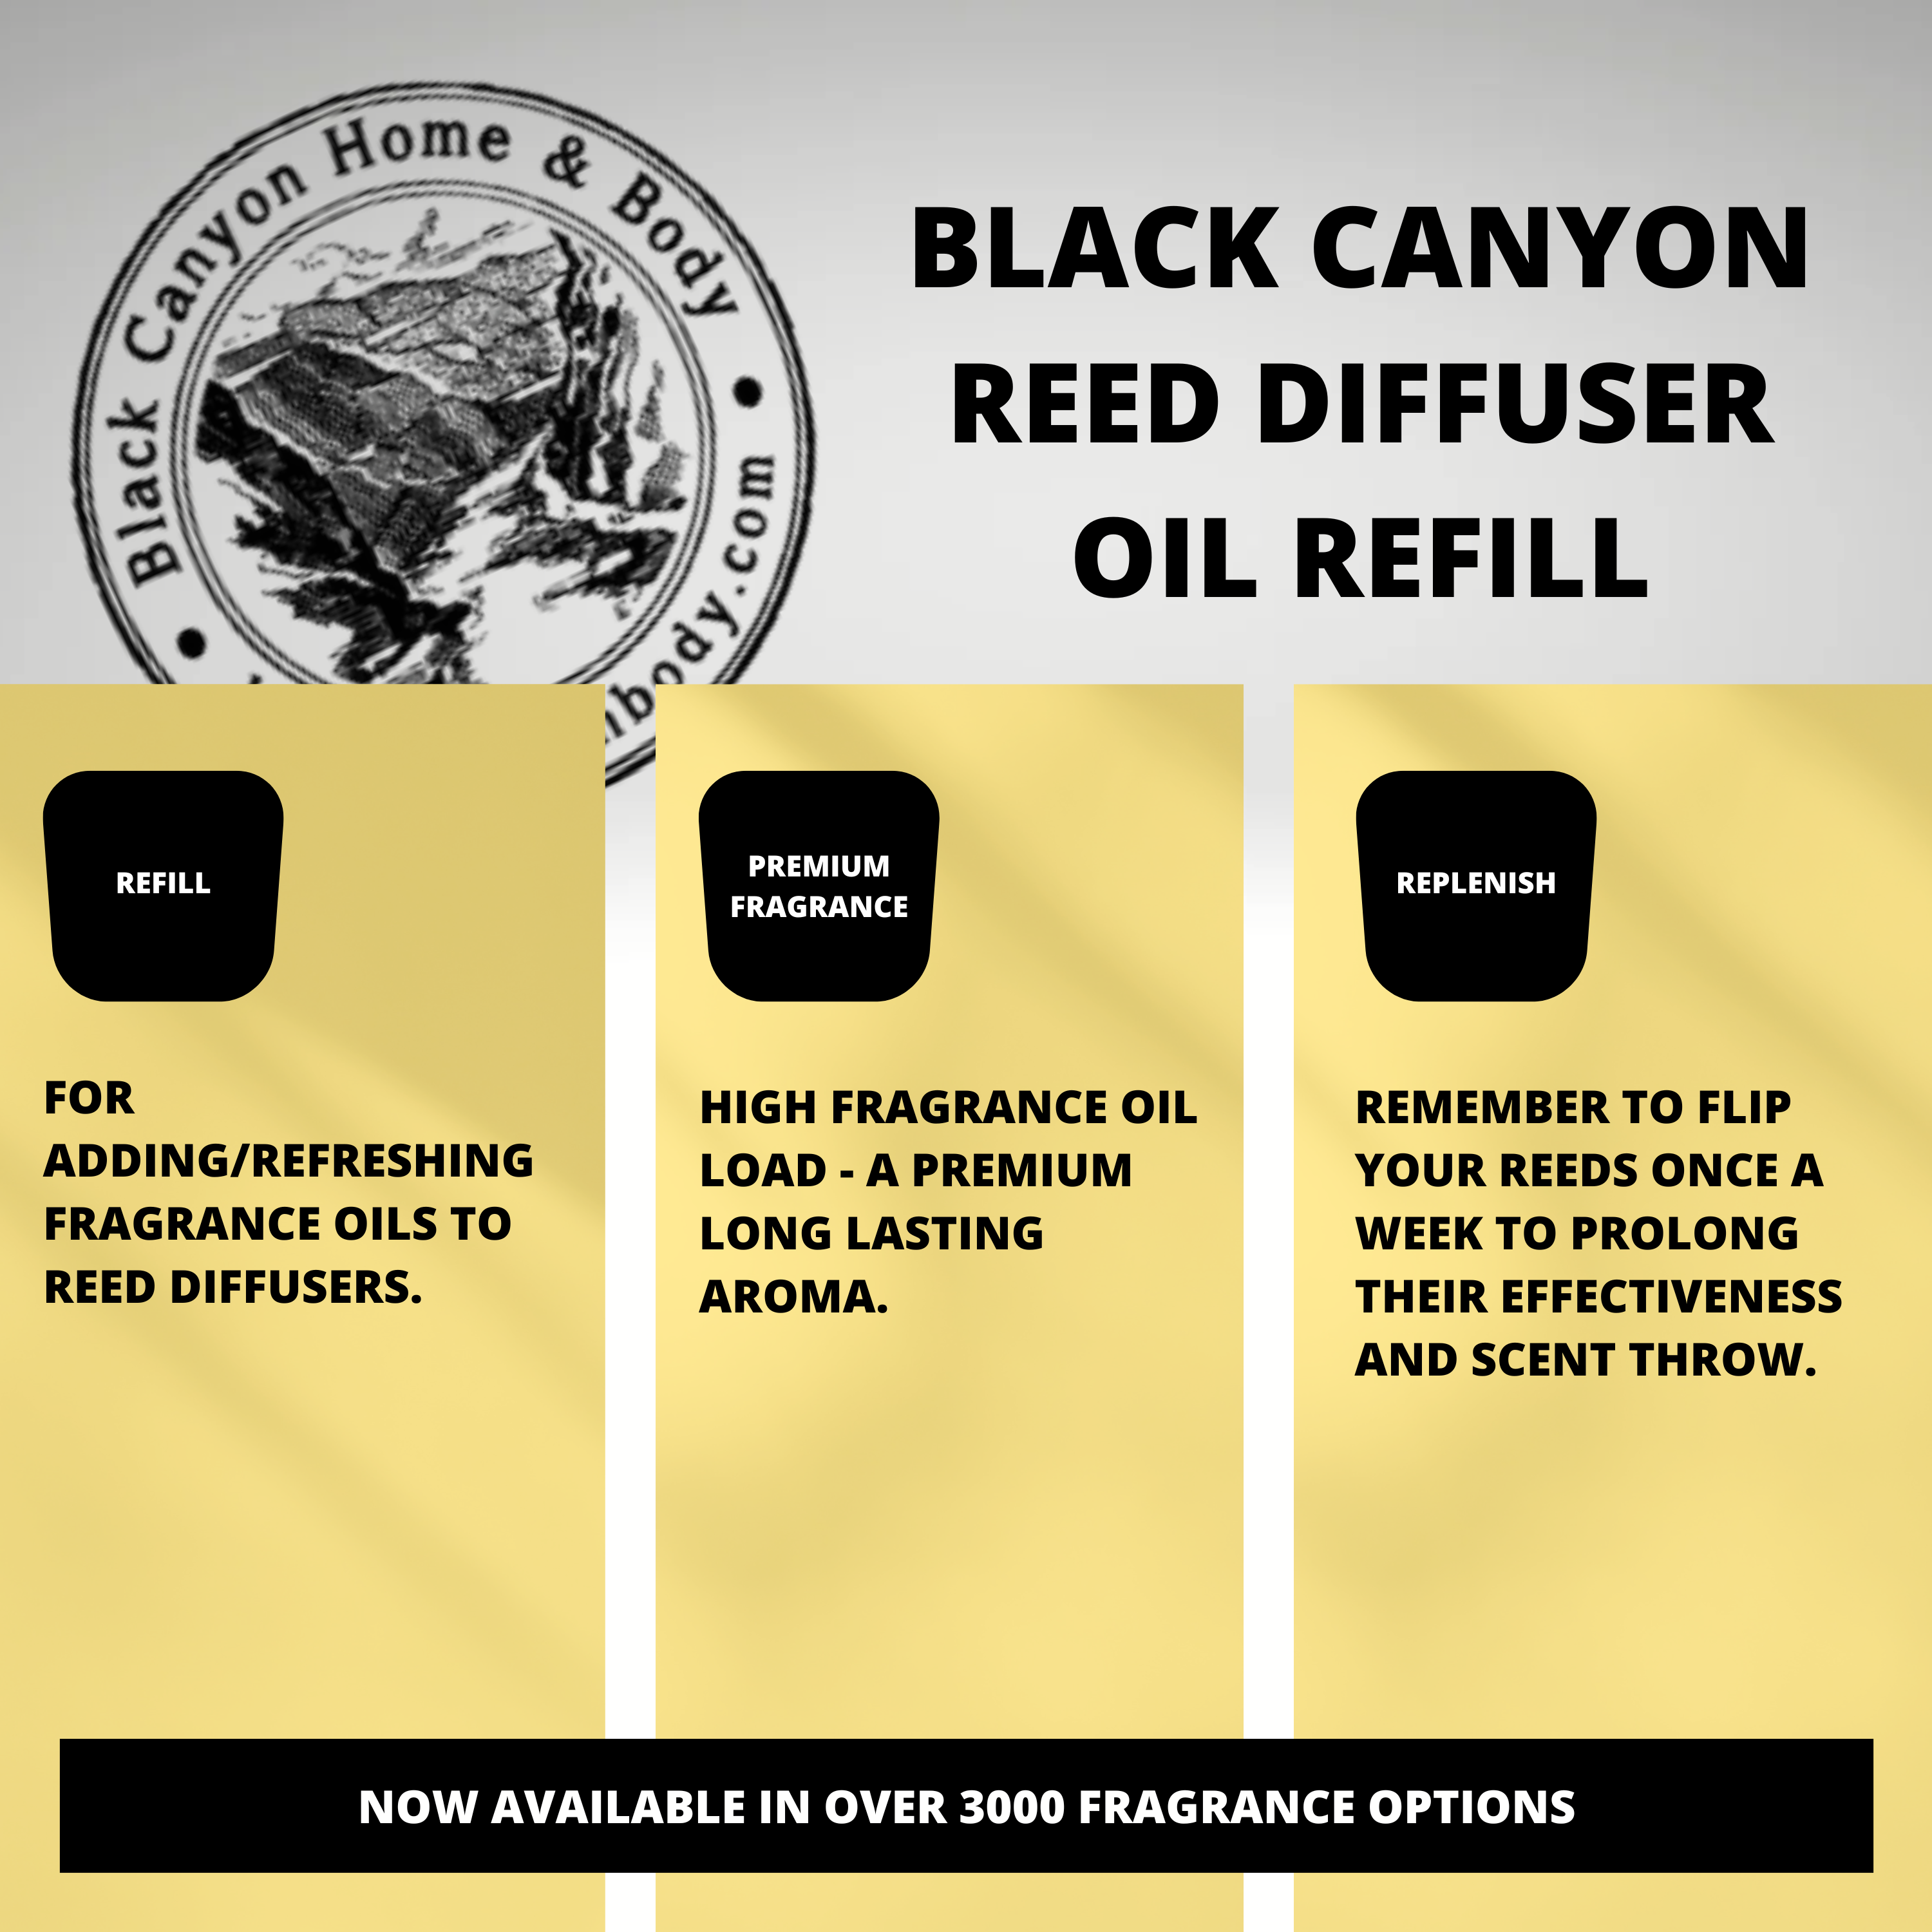 Black Canyon Taco Scented Reed Diffuser Oil Refill